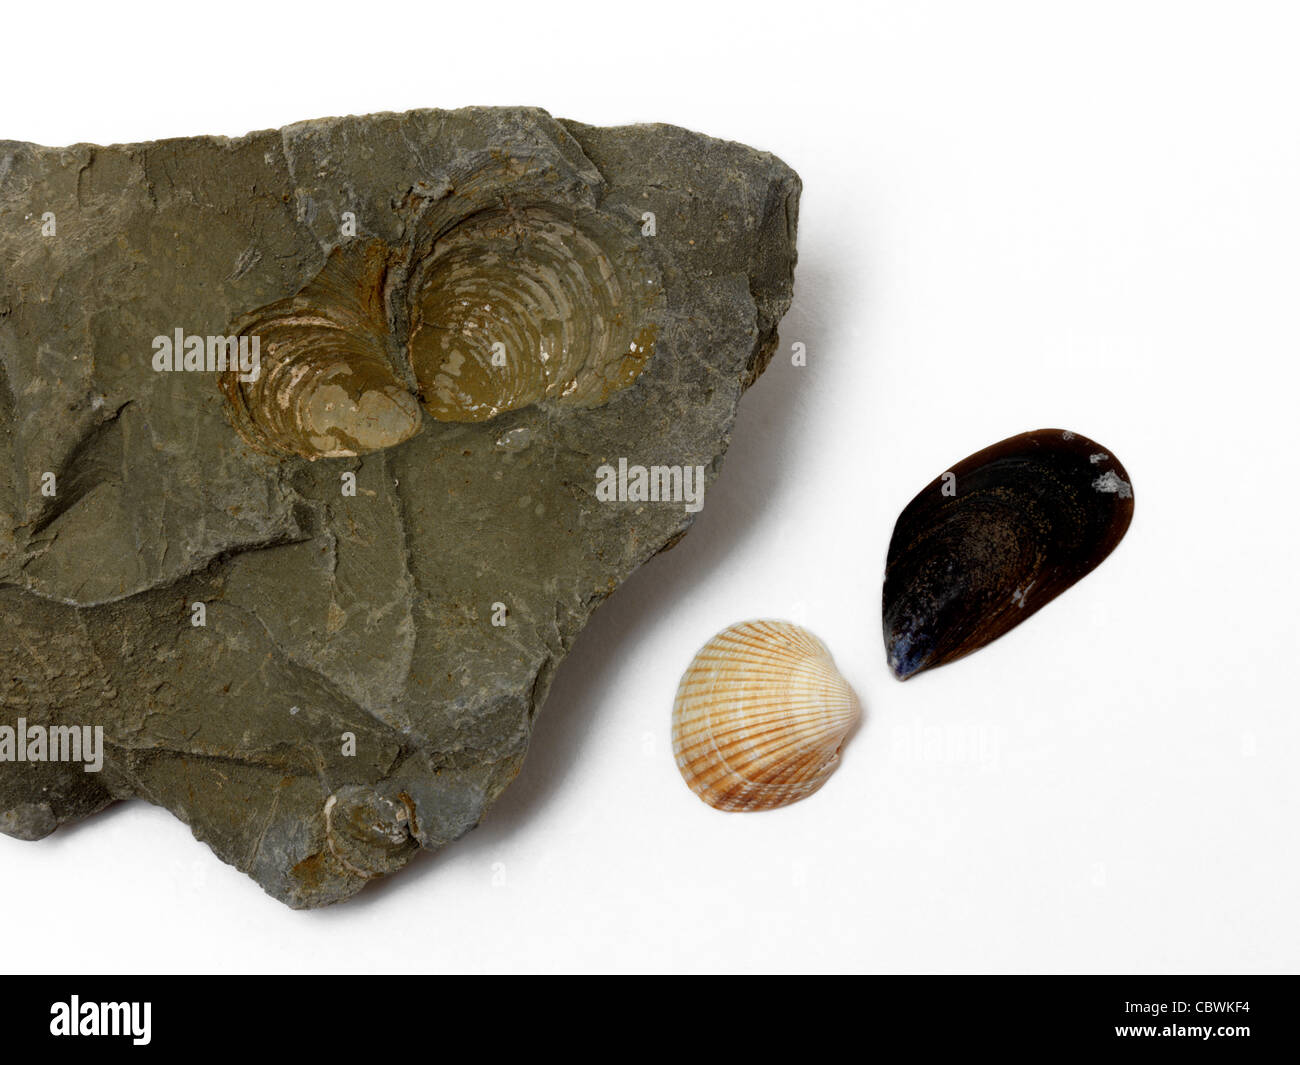 Rock With Fossils Of Shells With Cockle Shell And Mussel Shell Stock Photo